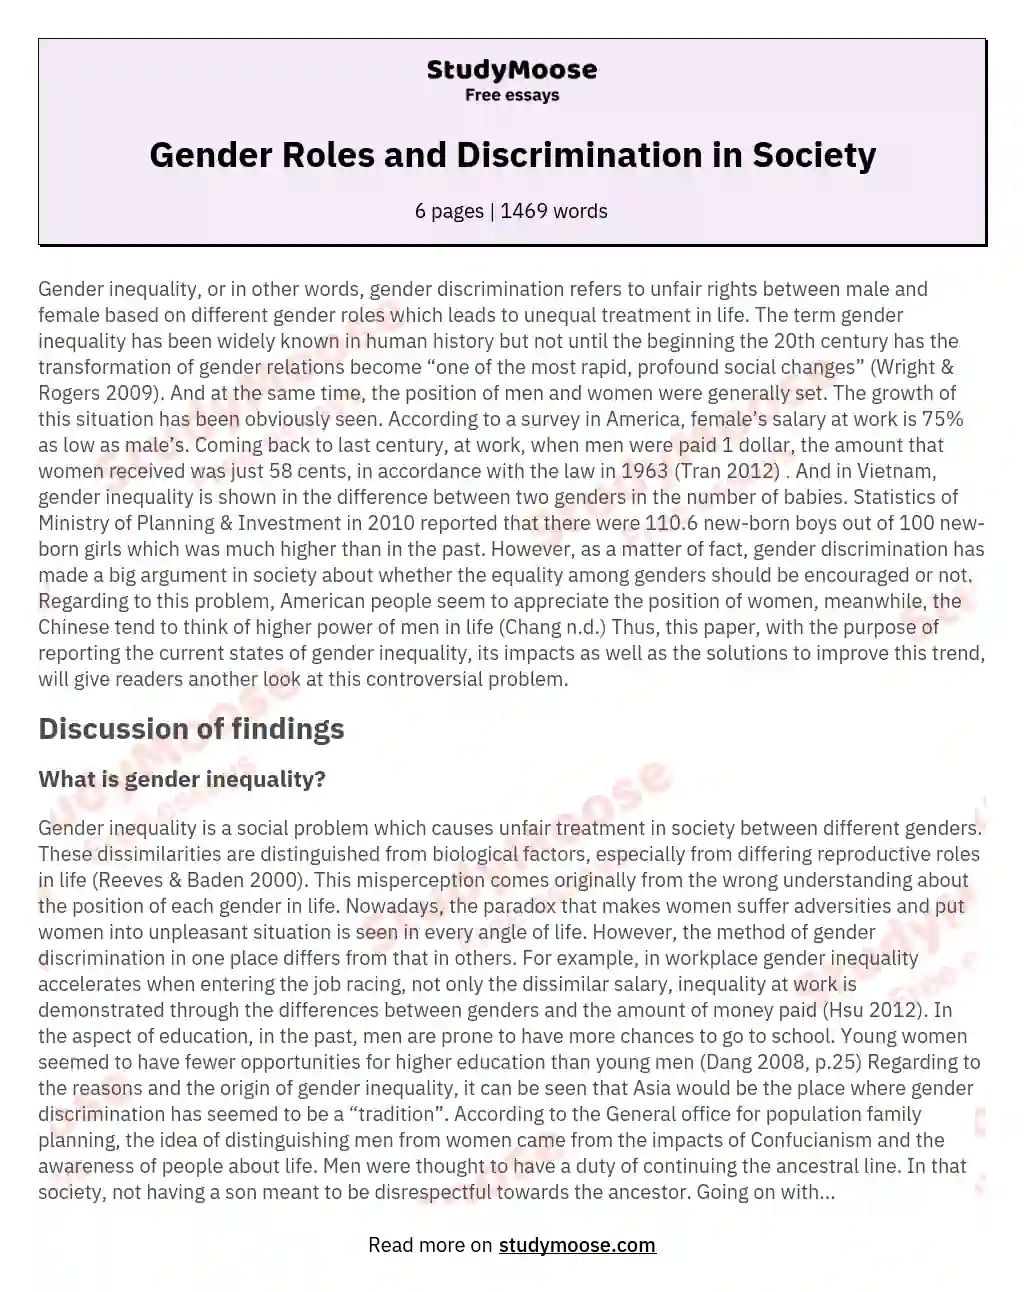 Gender Roles and Discrimination in Society